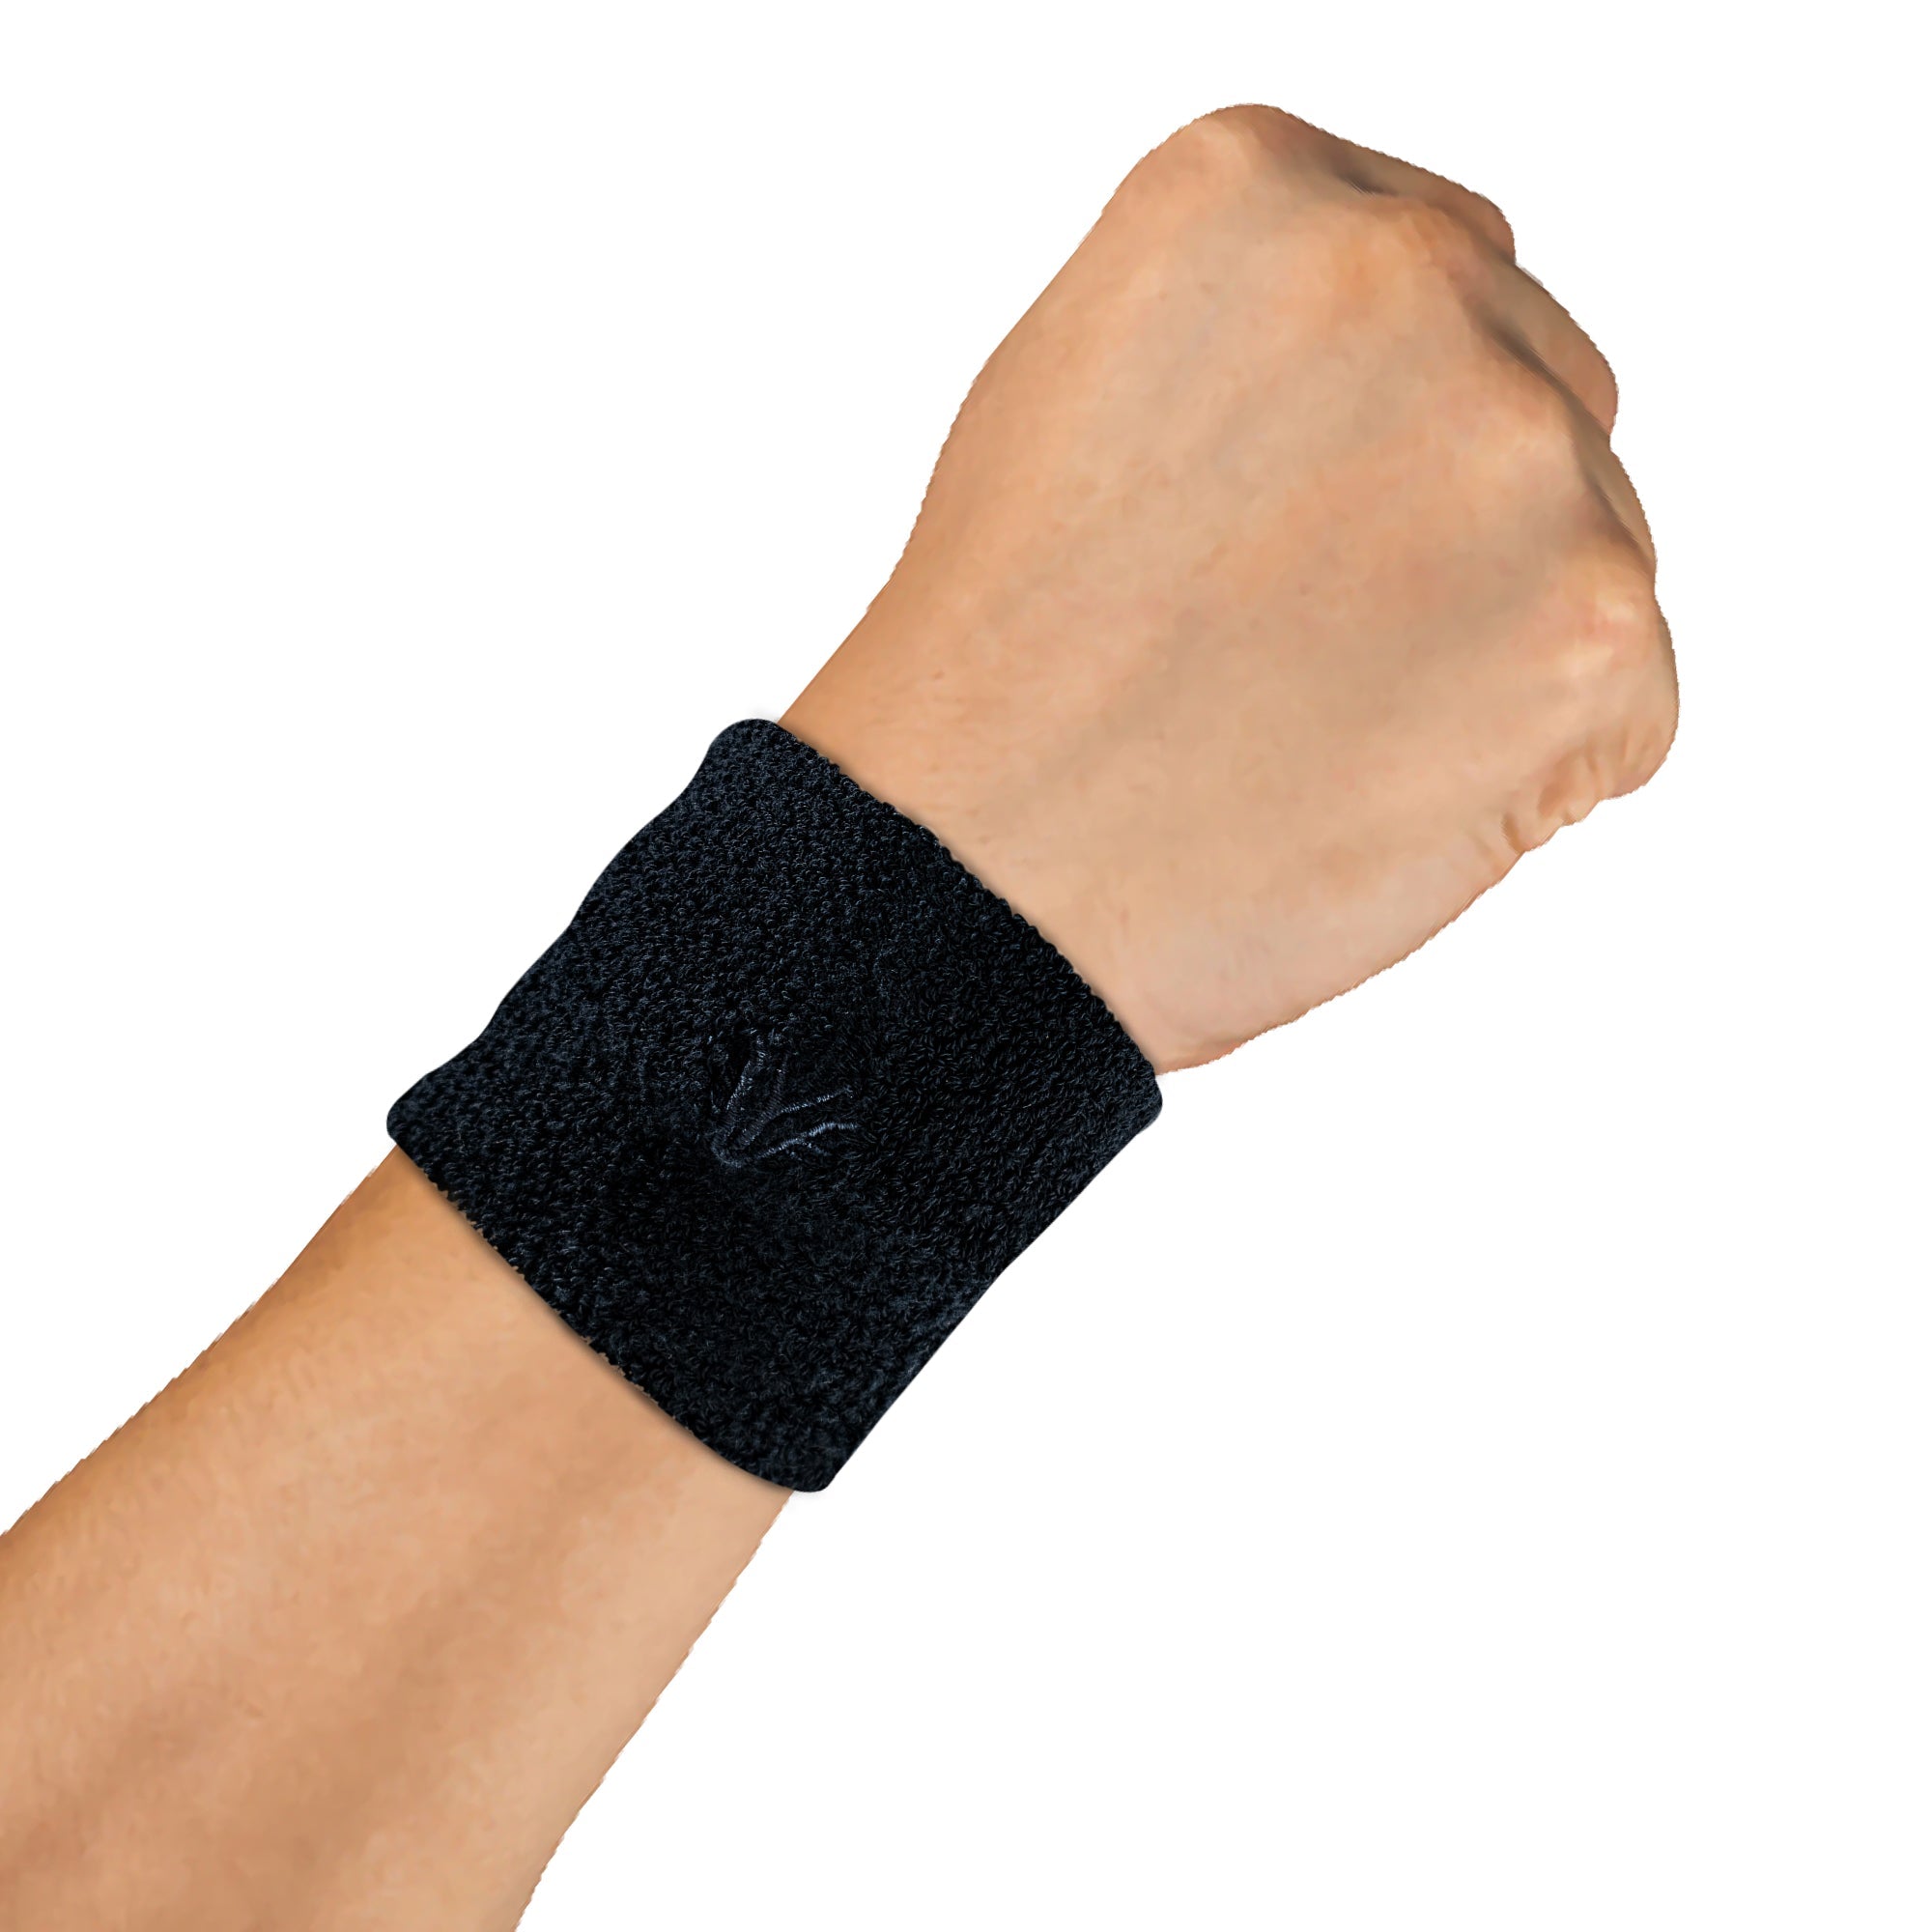 Cotton Wrist Band with Antibacterial and Moisture Wicking (Unisex) - Pack of 2 Pairs